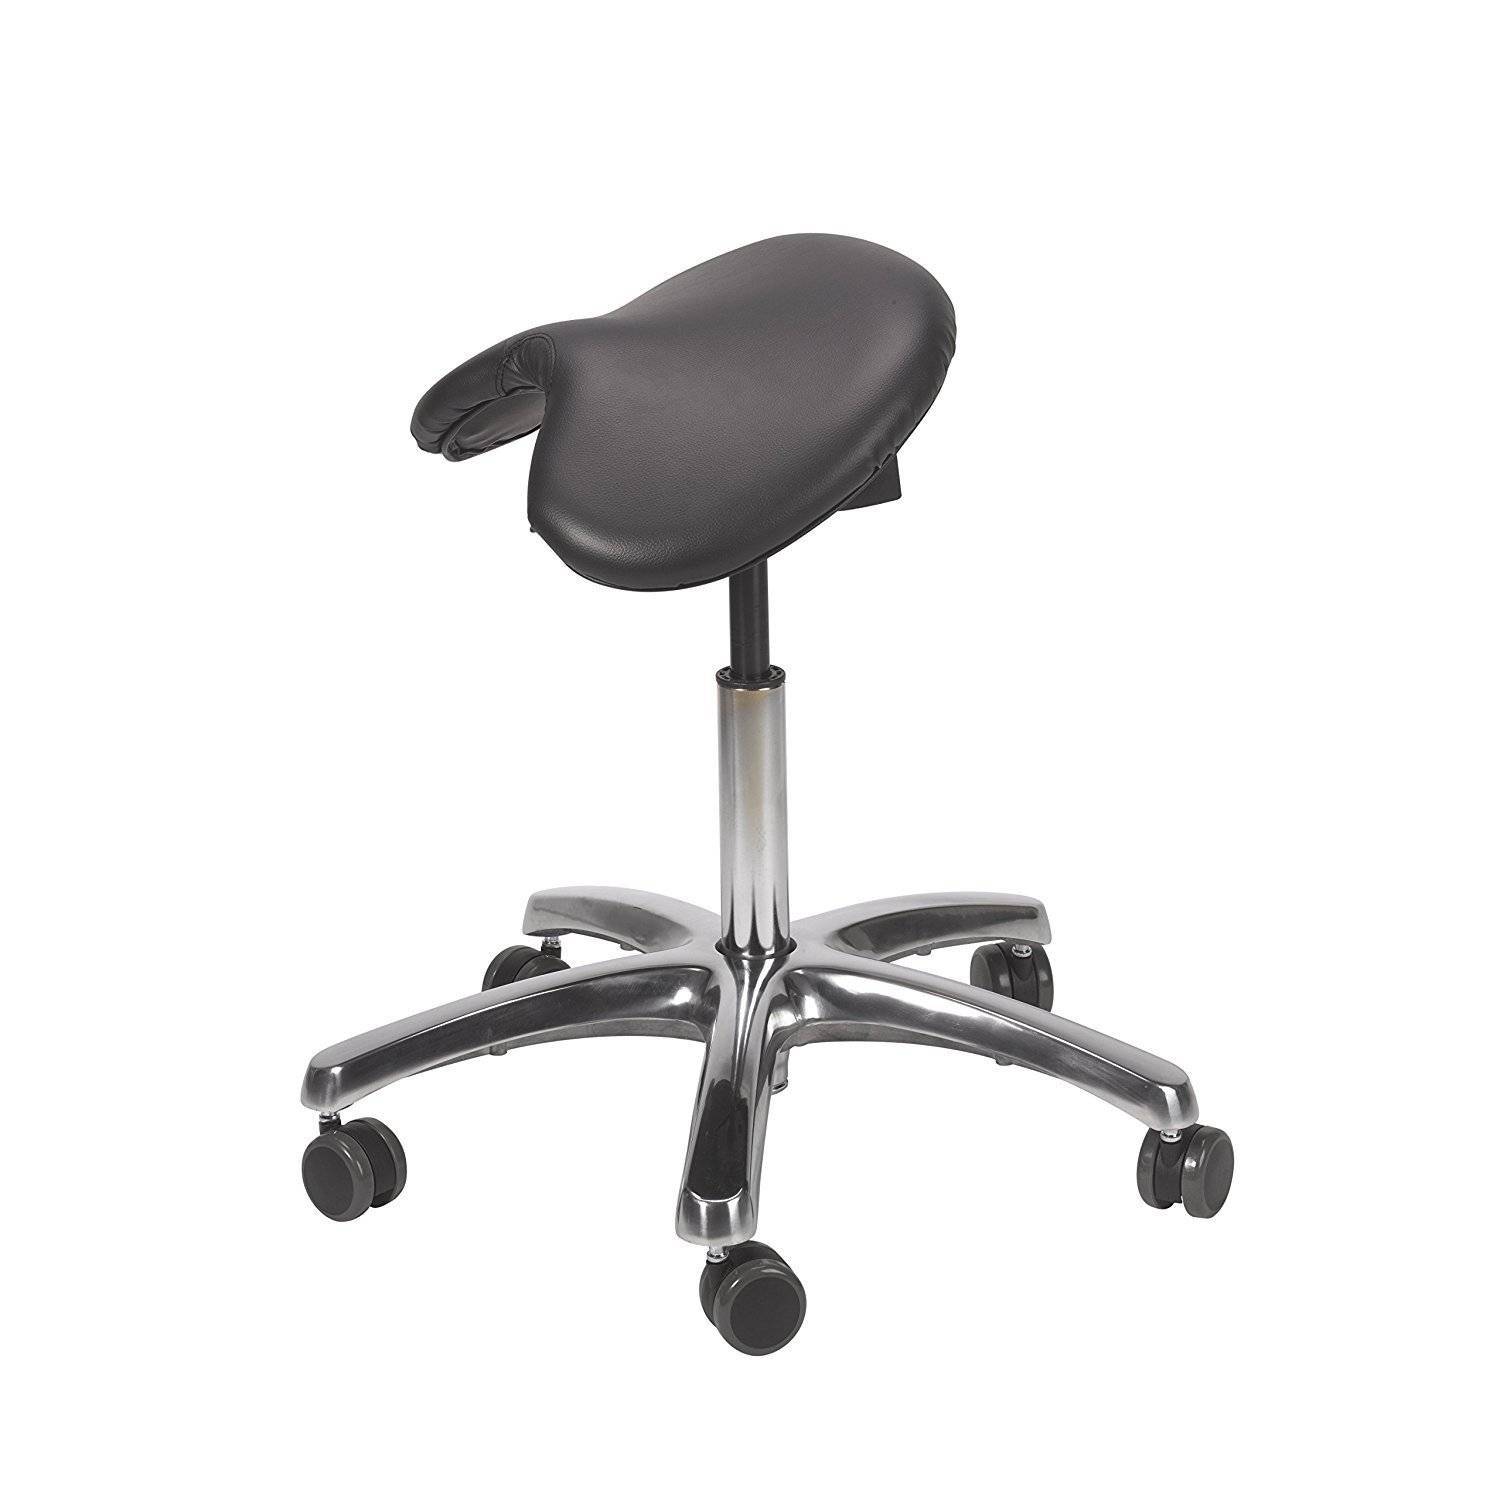 Jobri BetterPosture Ergonomic Saddle Chair for Office and Medical | Sithealthier.com